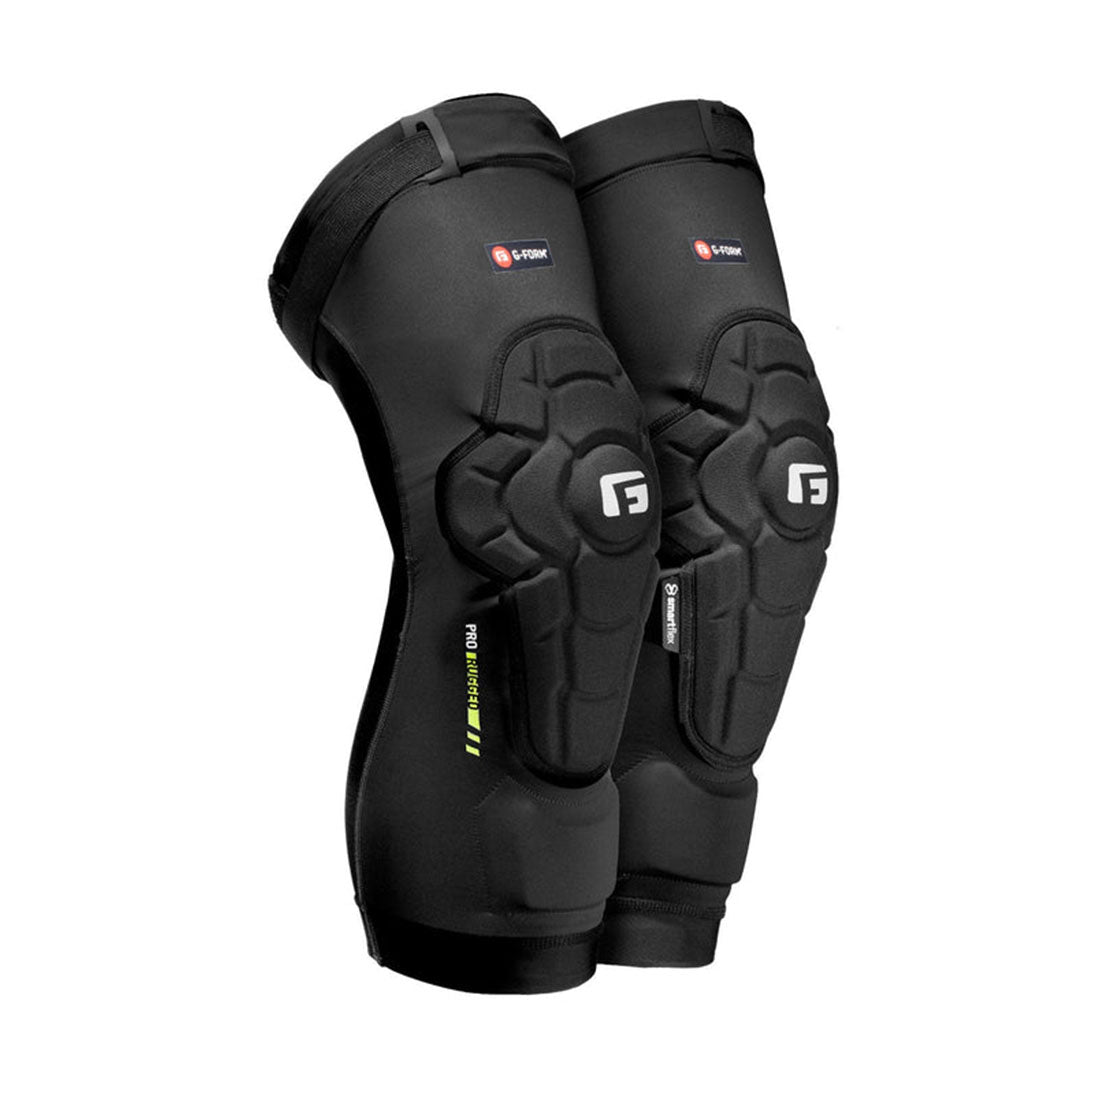 G-Form Pro-Rugged V2 Knee Protective Gear